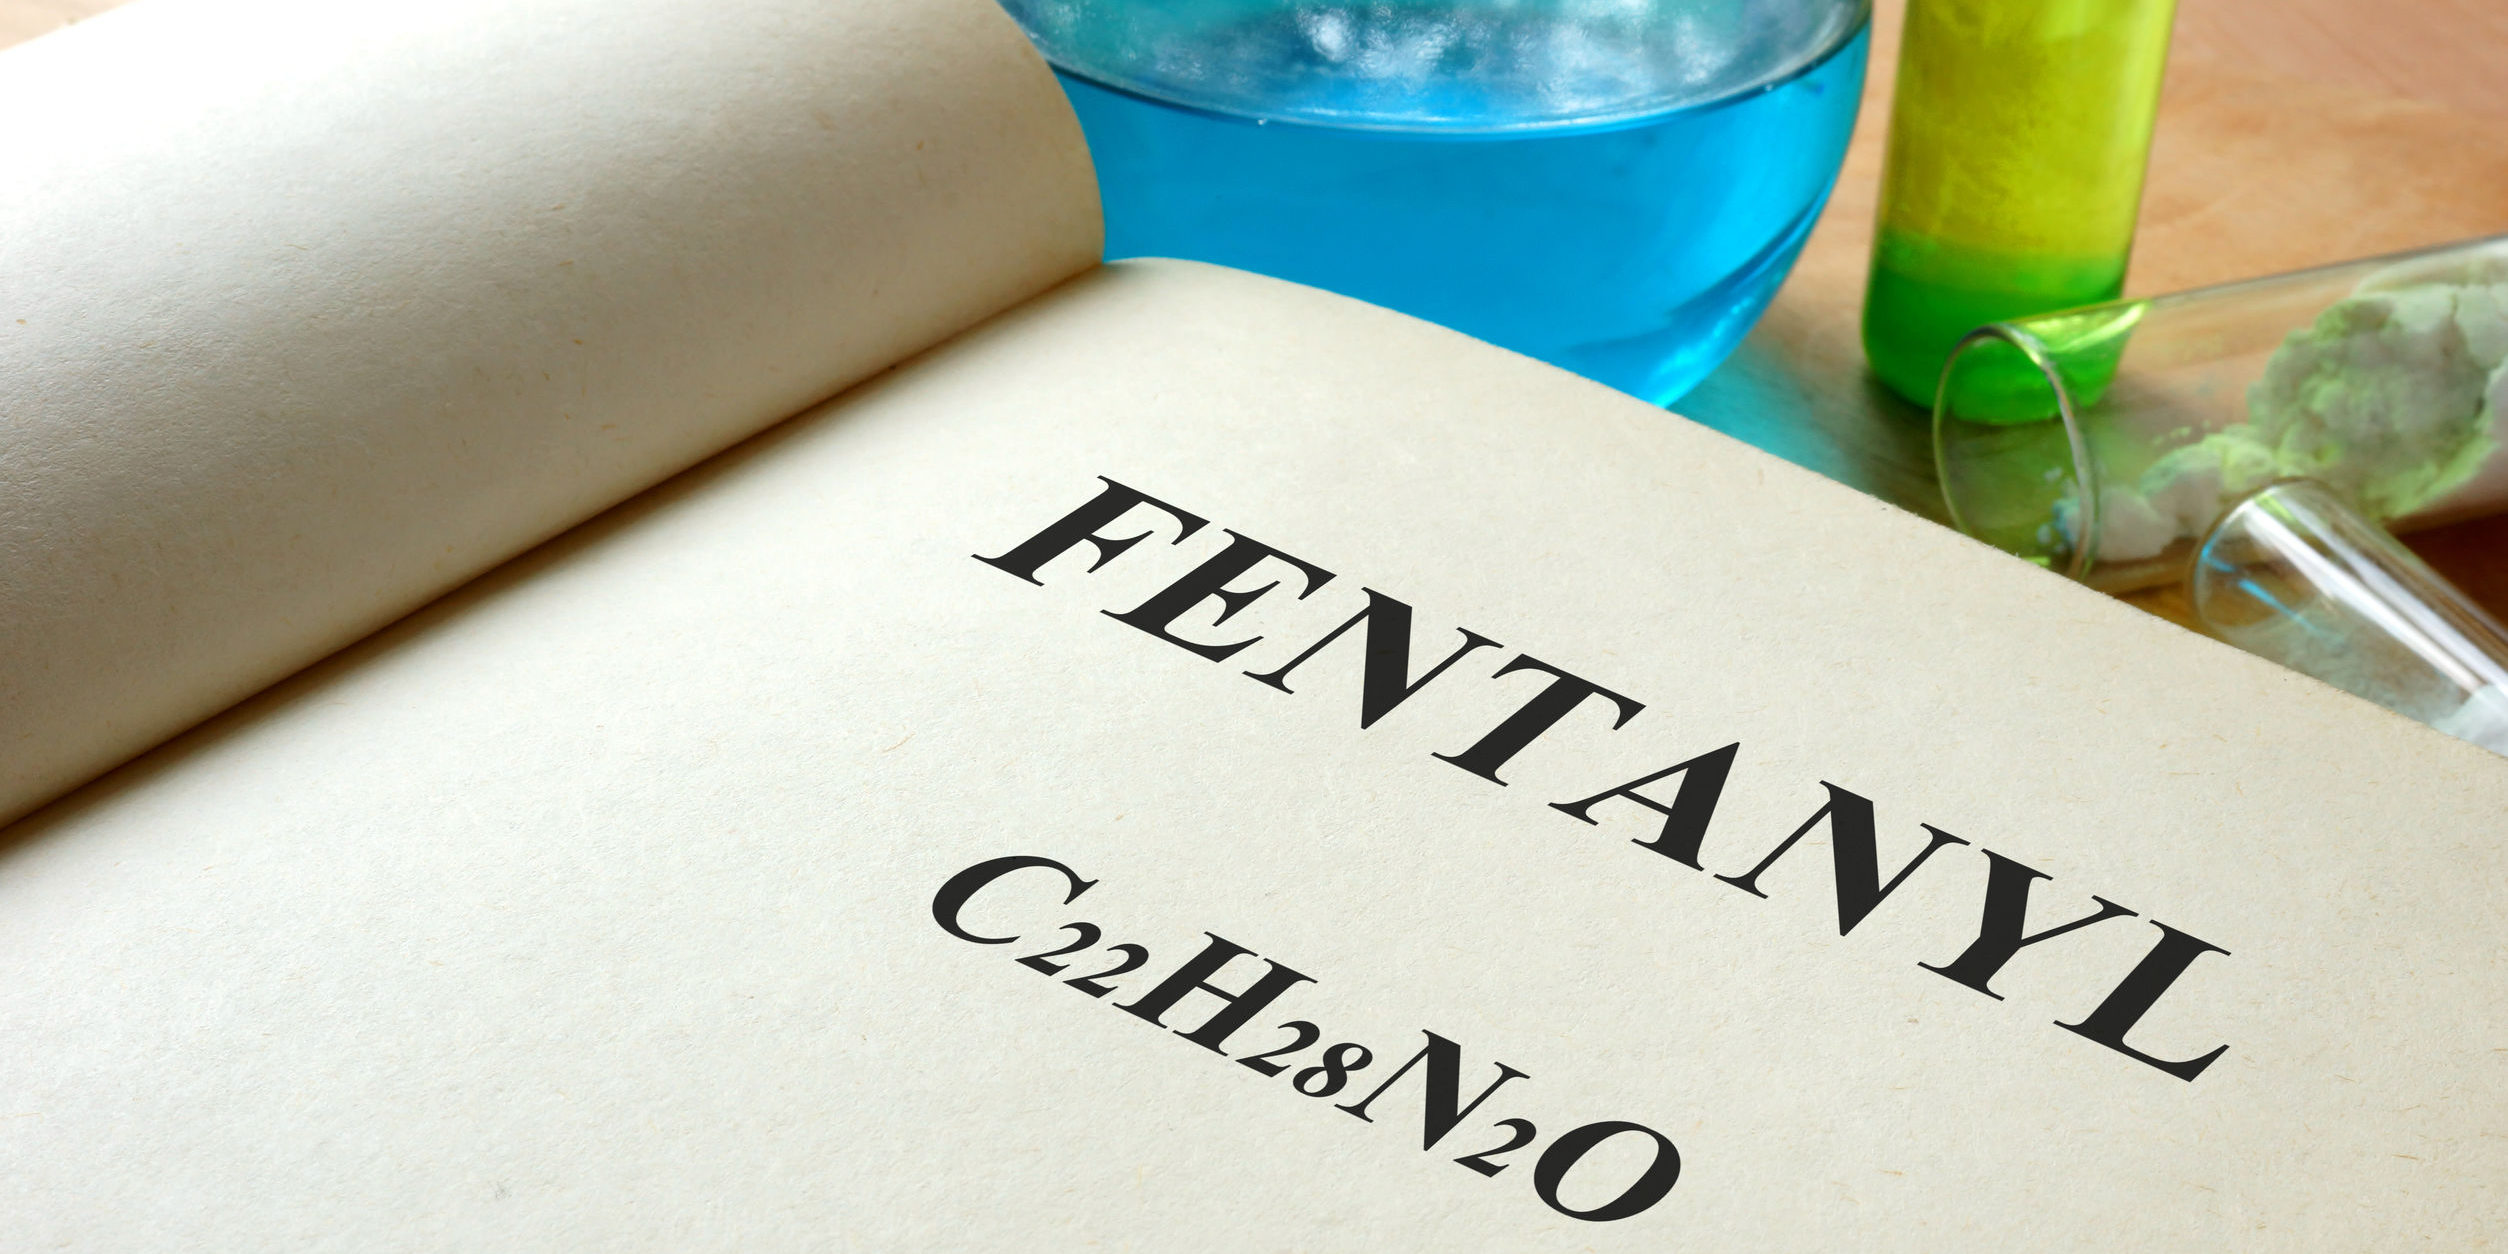 A book with fentanyl described and test tubes on a table illustrating pharmaceutical company creating fentanyl-based drugs